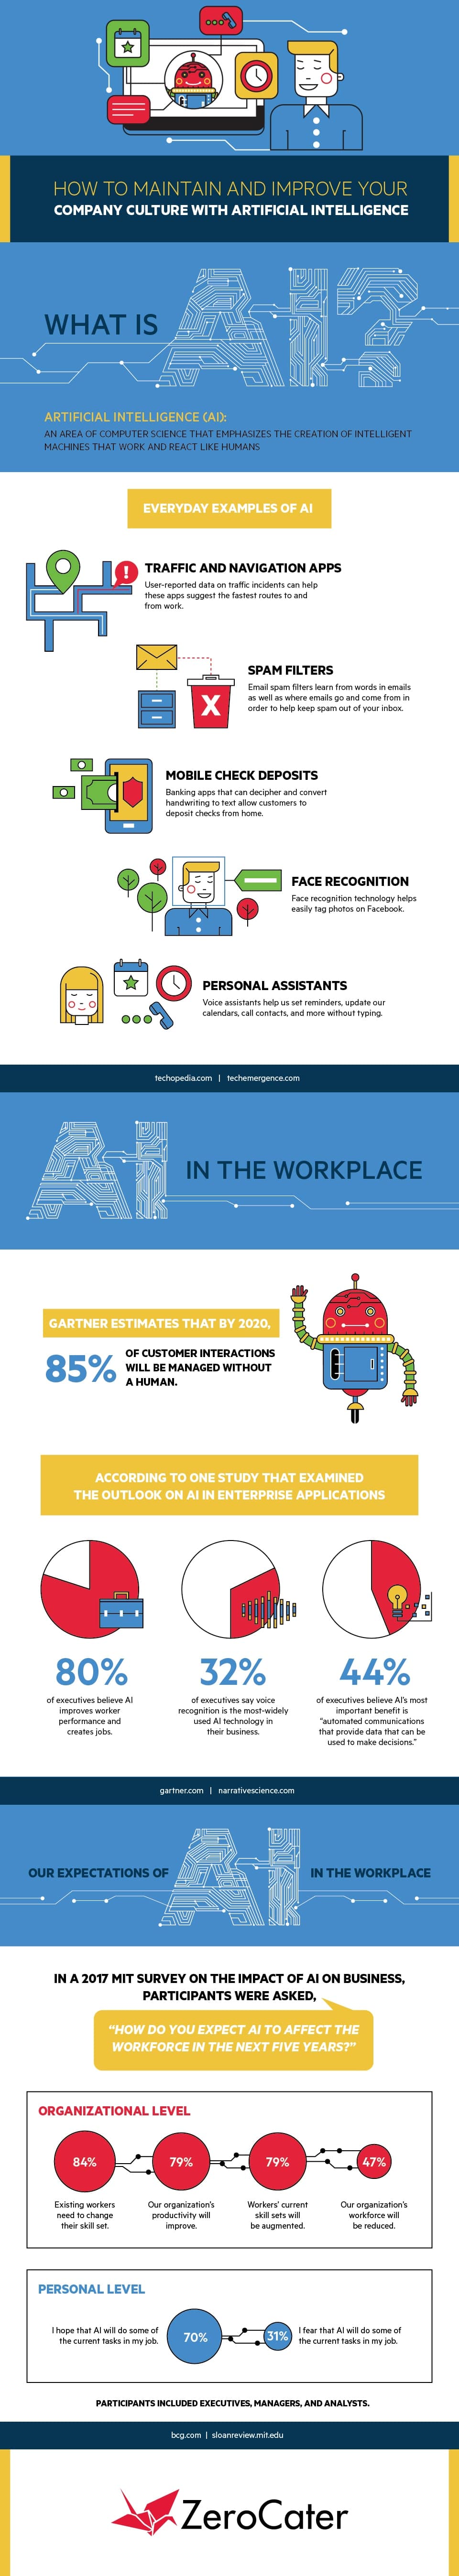 How to Maintain and Improve your Company Culture with AI InfoGraphics